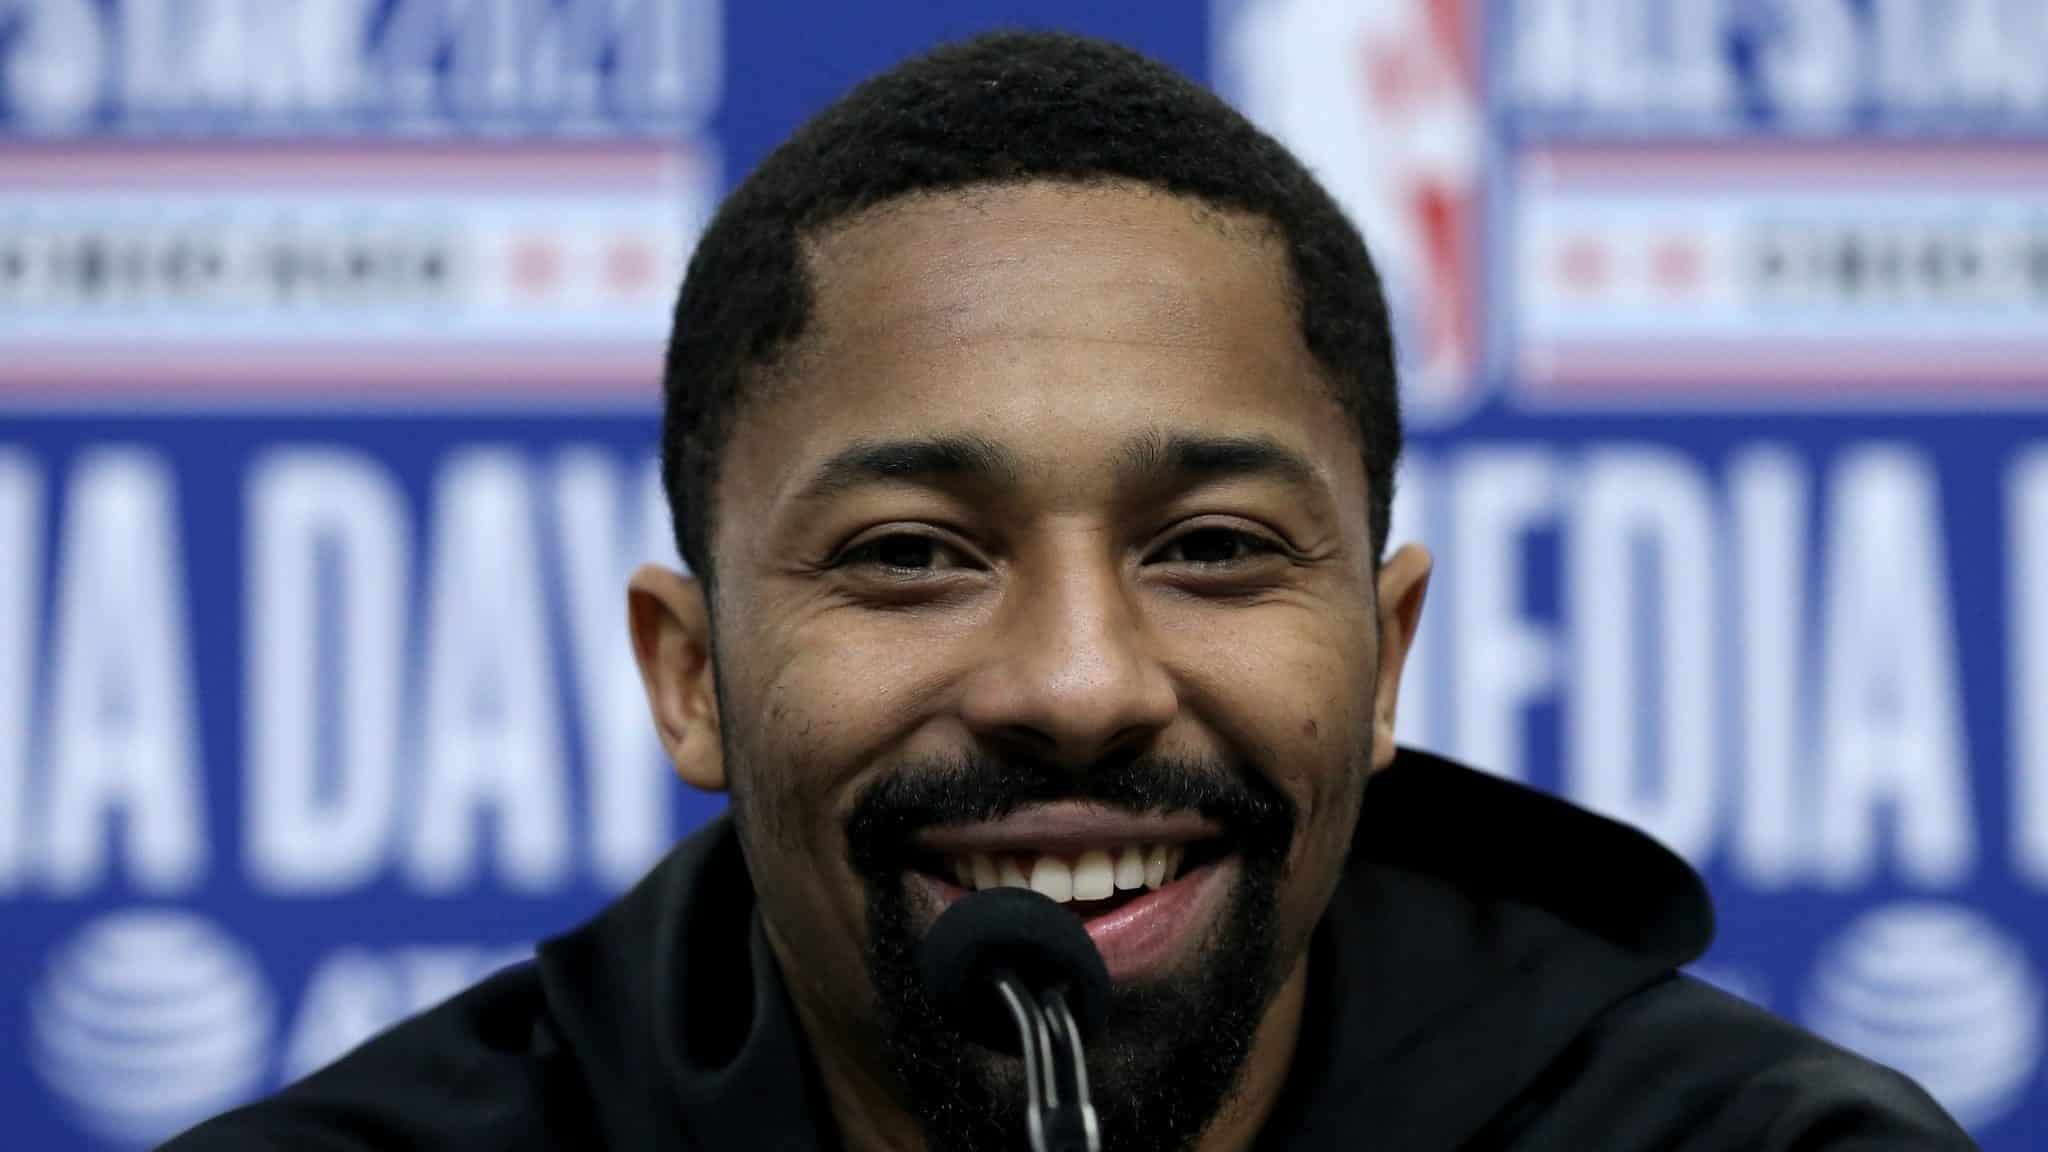 CHICAGO, ILLINOIS - FEBRUARY 15: Spencer Dinwiddie of the Brooklyn Nets speaks to the media during 2020 NBA All-Star - Practice & Media Day at Wintrust Arena on February 15, 2020 in Chicago, Illinois. NOTE TO USER: User expressly acknowledges and agrees that, by downloading and or using this photograph, User is consenting to the terms and conditions of the Getty Images License Agreement.